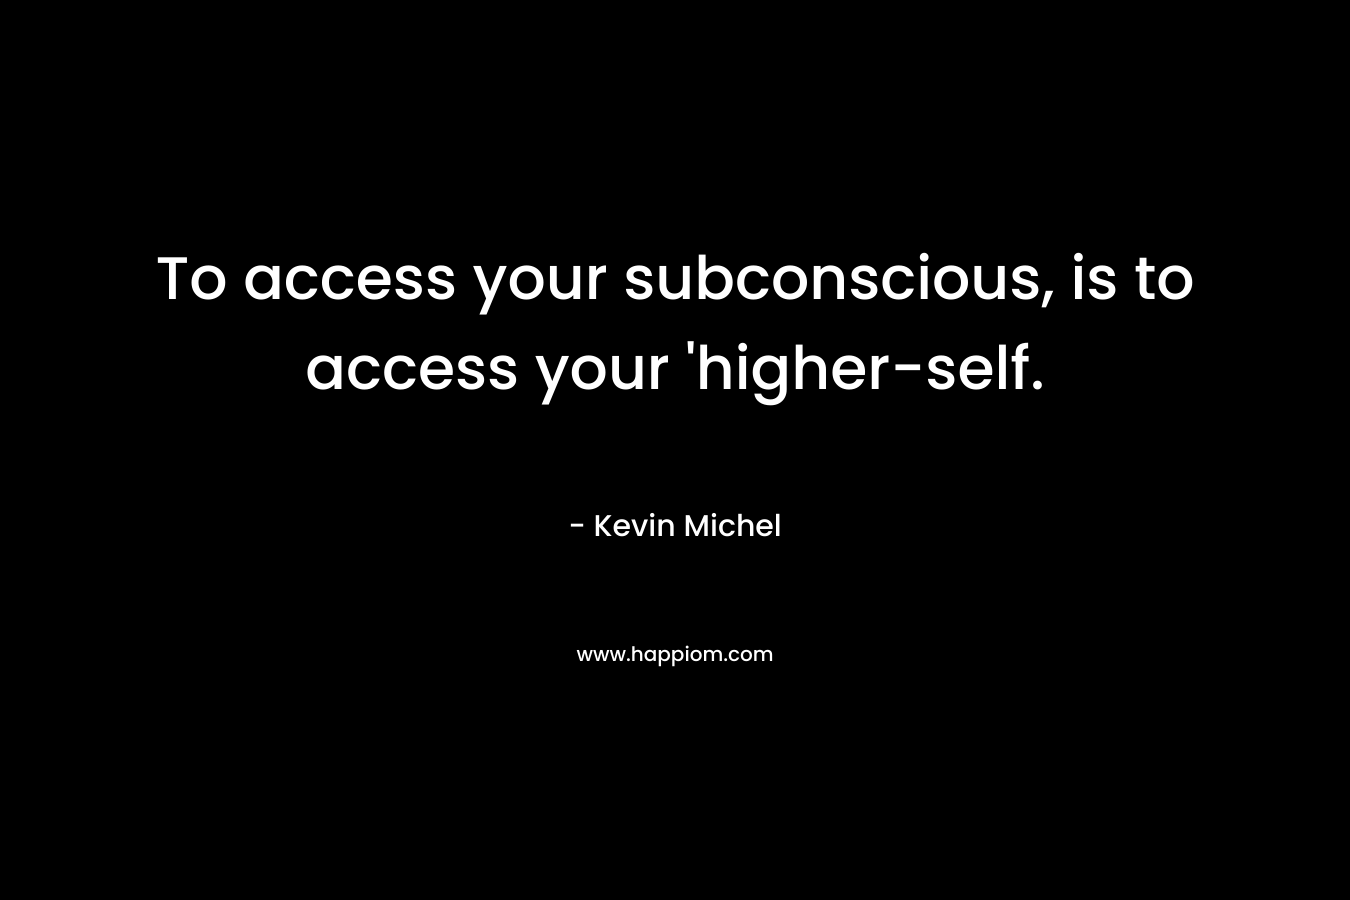 To access your subconscious, is to access your 'higher-self.